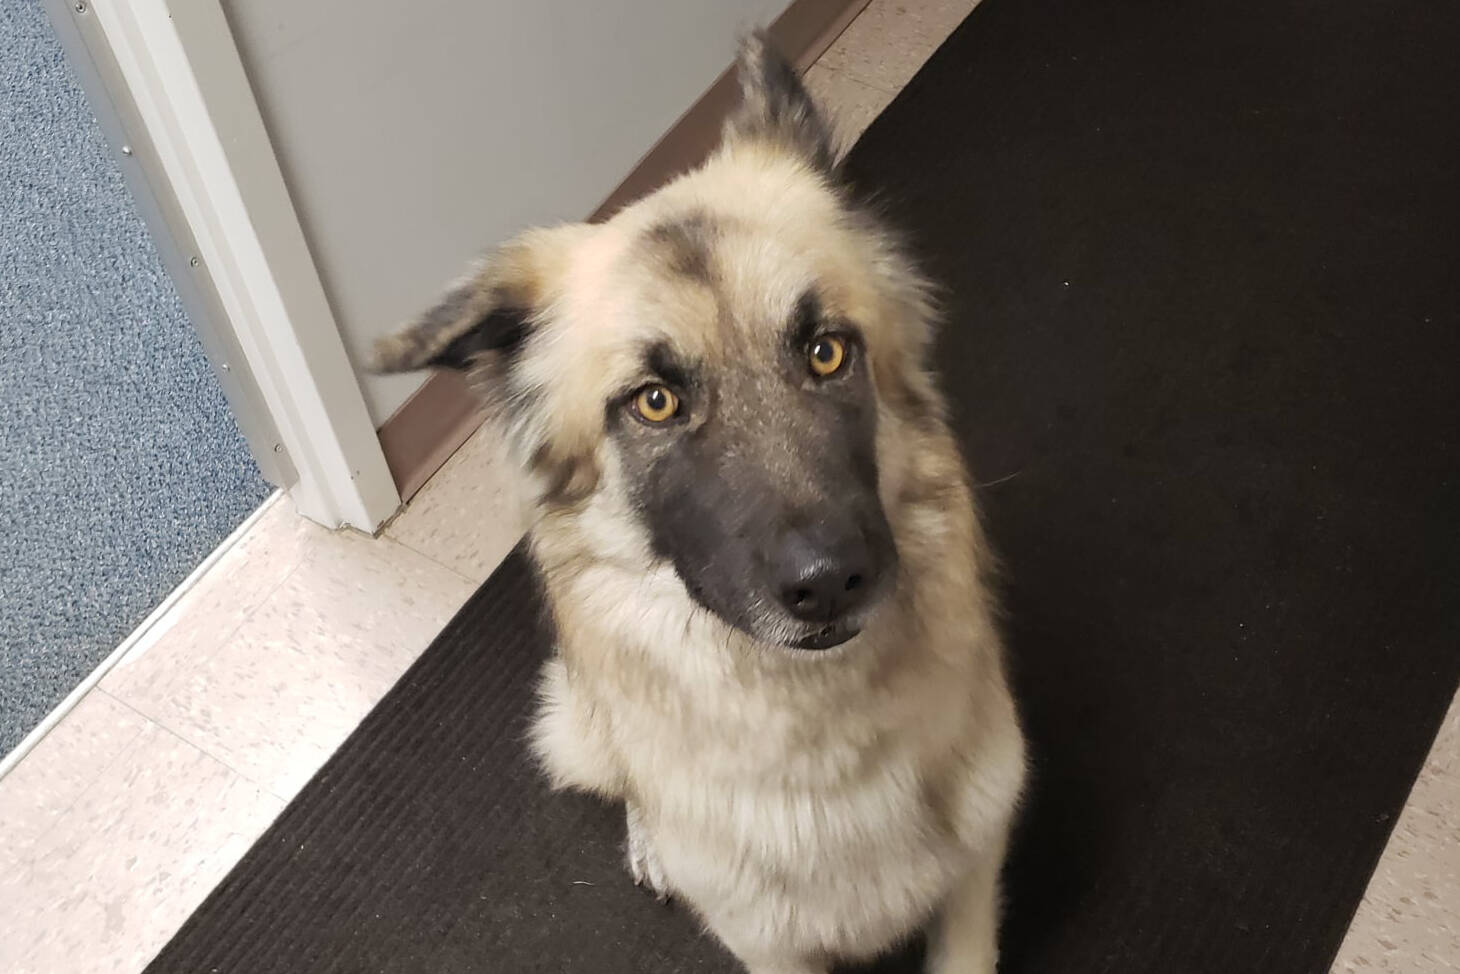 RCMP staff spent some time with this pup after it showed up at the detachment, but are now looking for its owner. (Vernon North Okanagan RCMP photo)